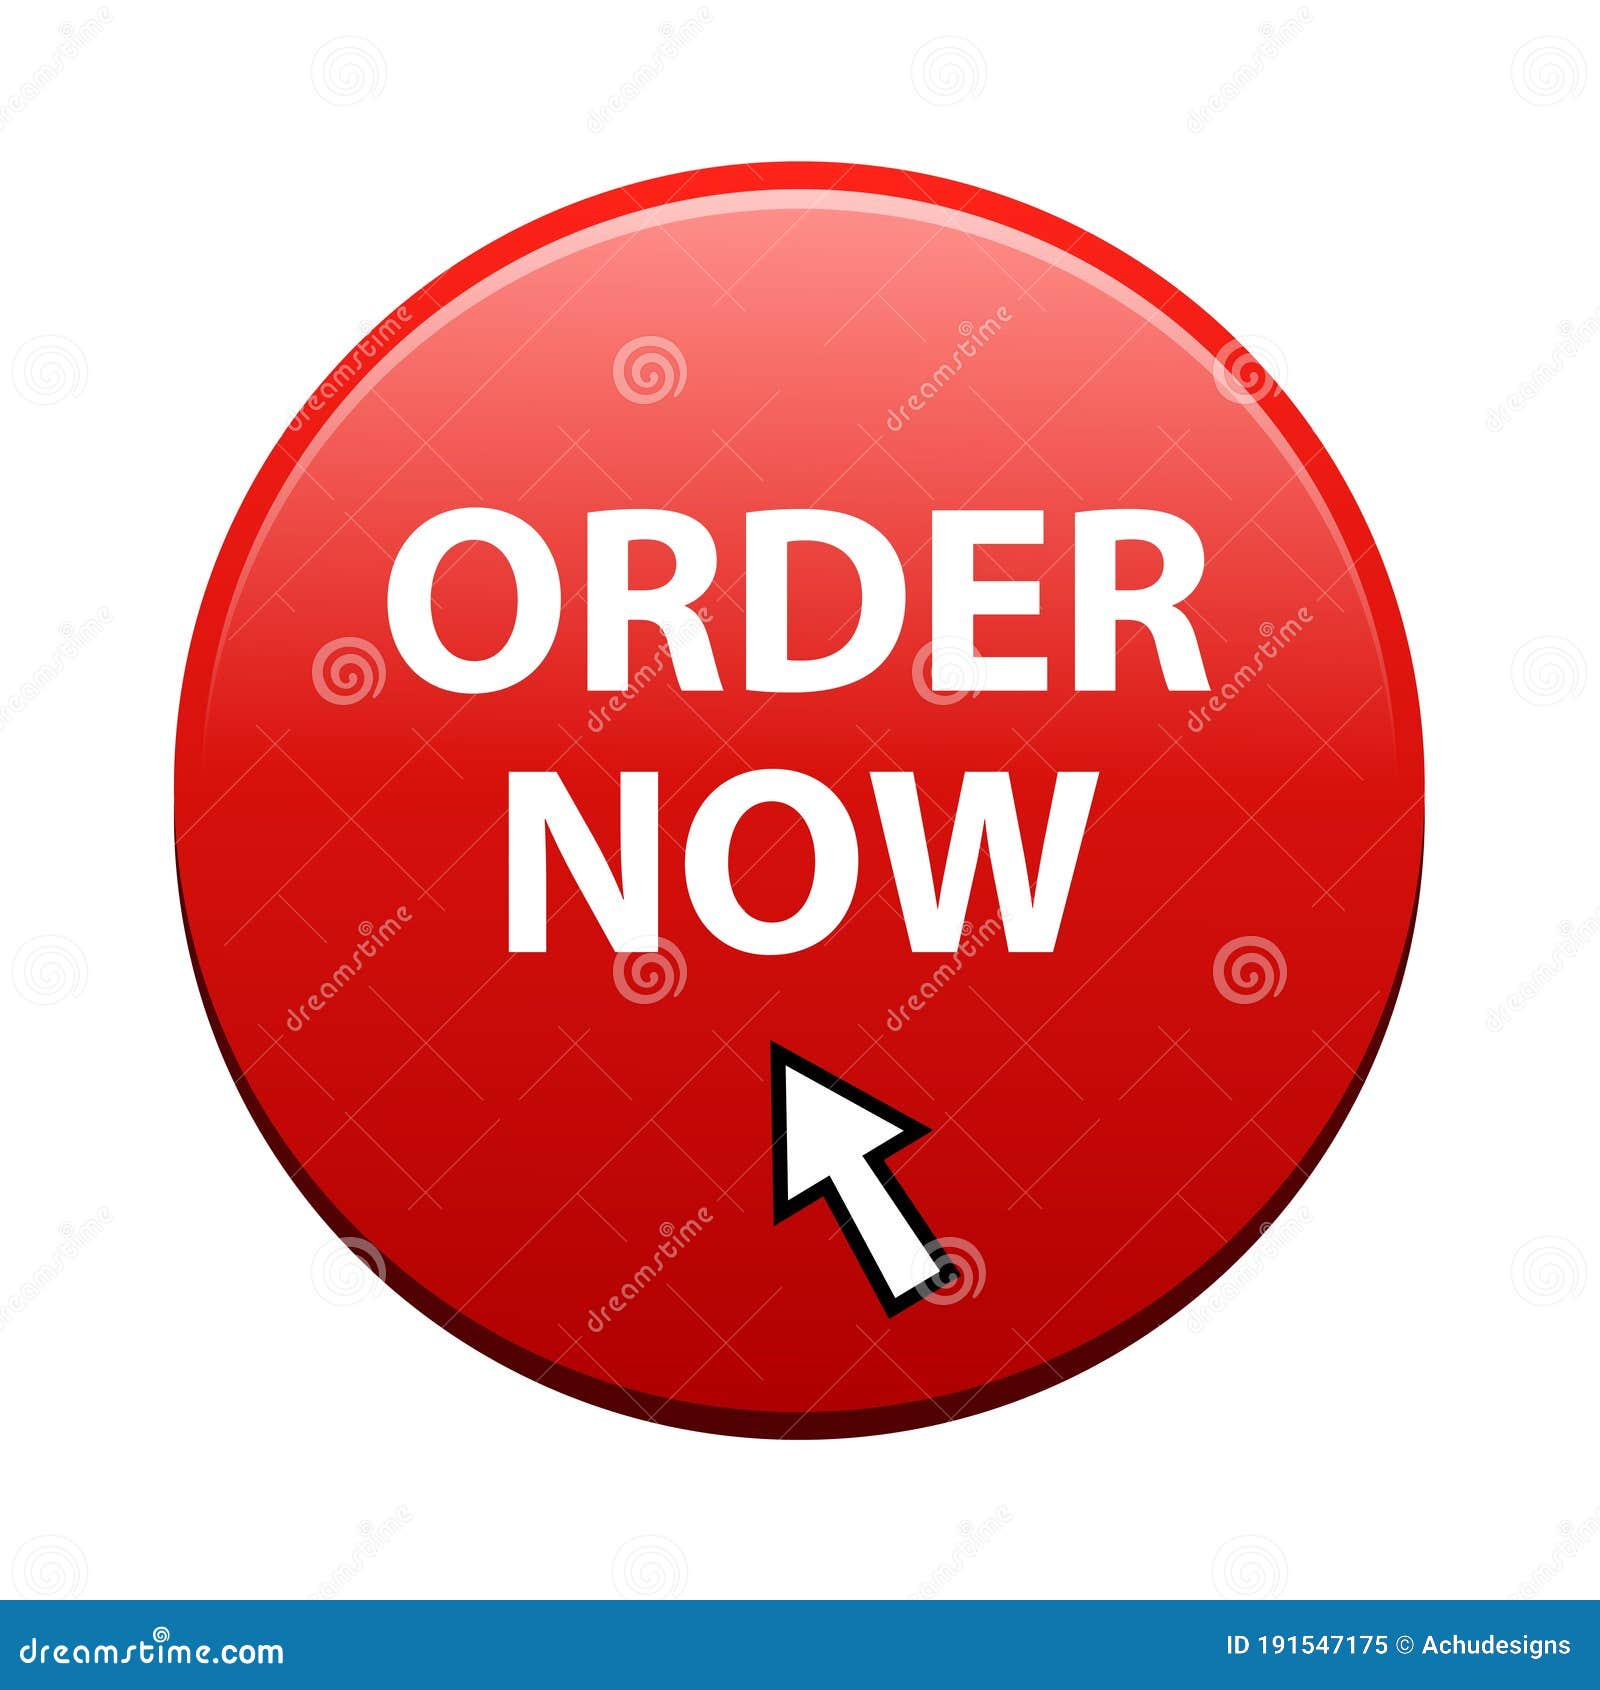 order now button